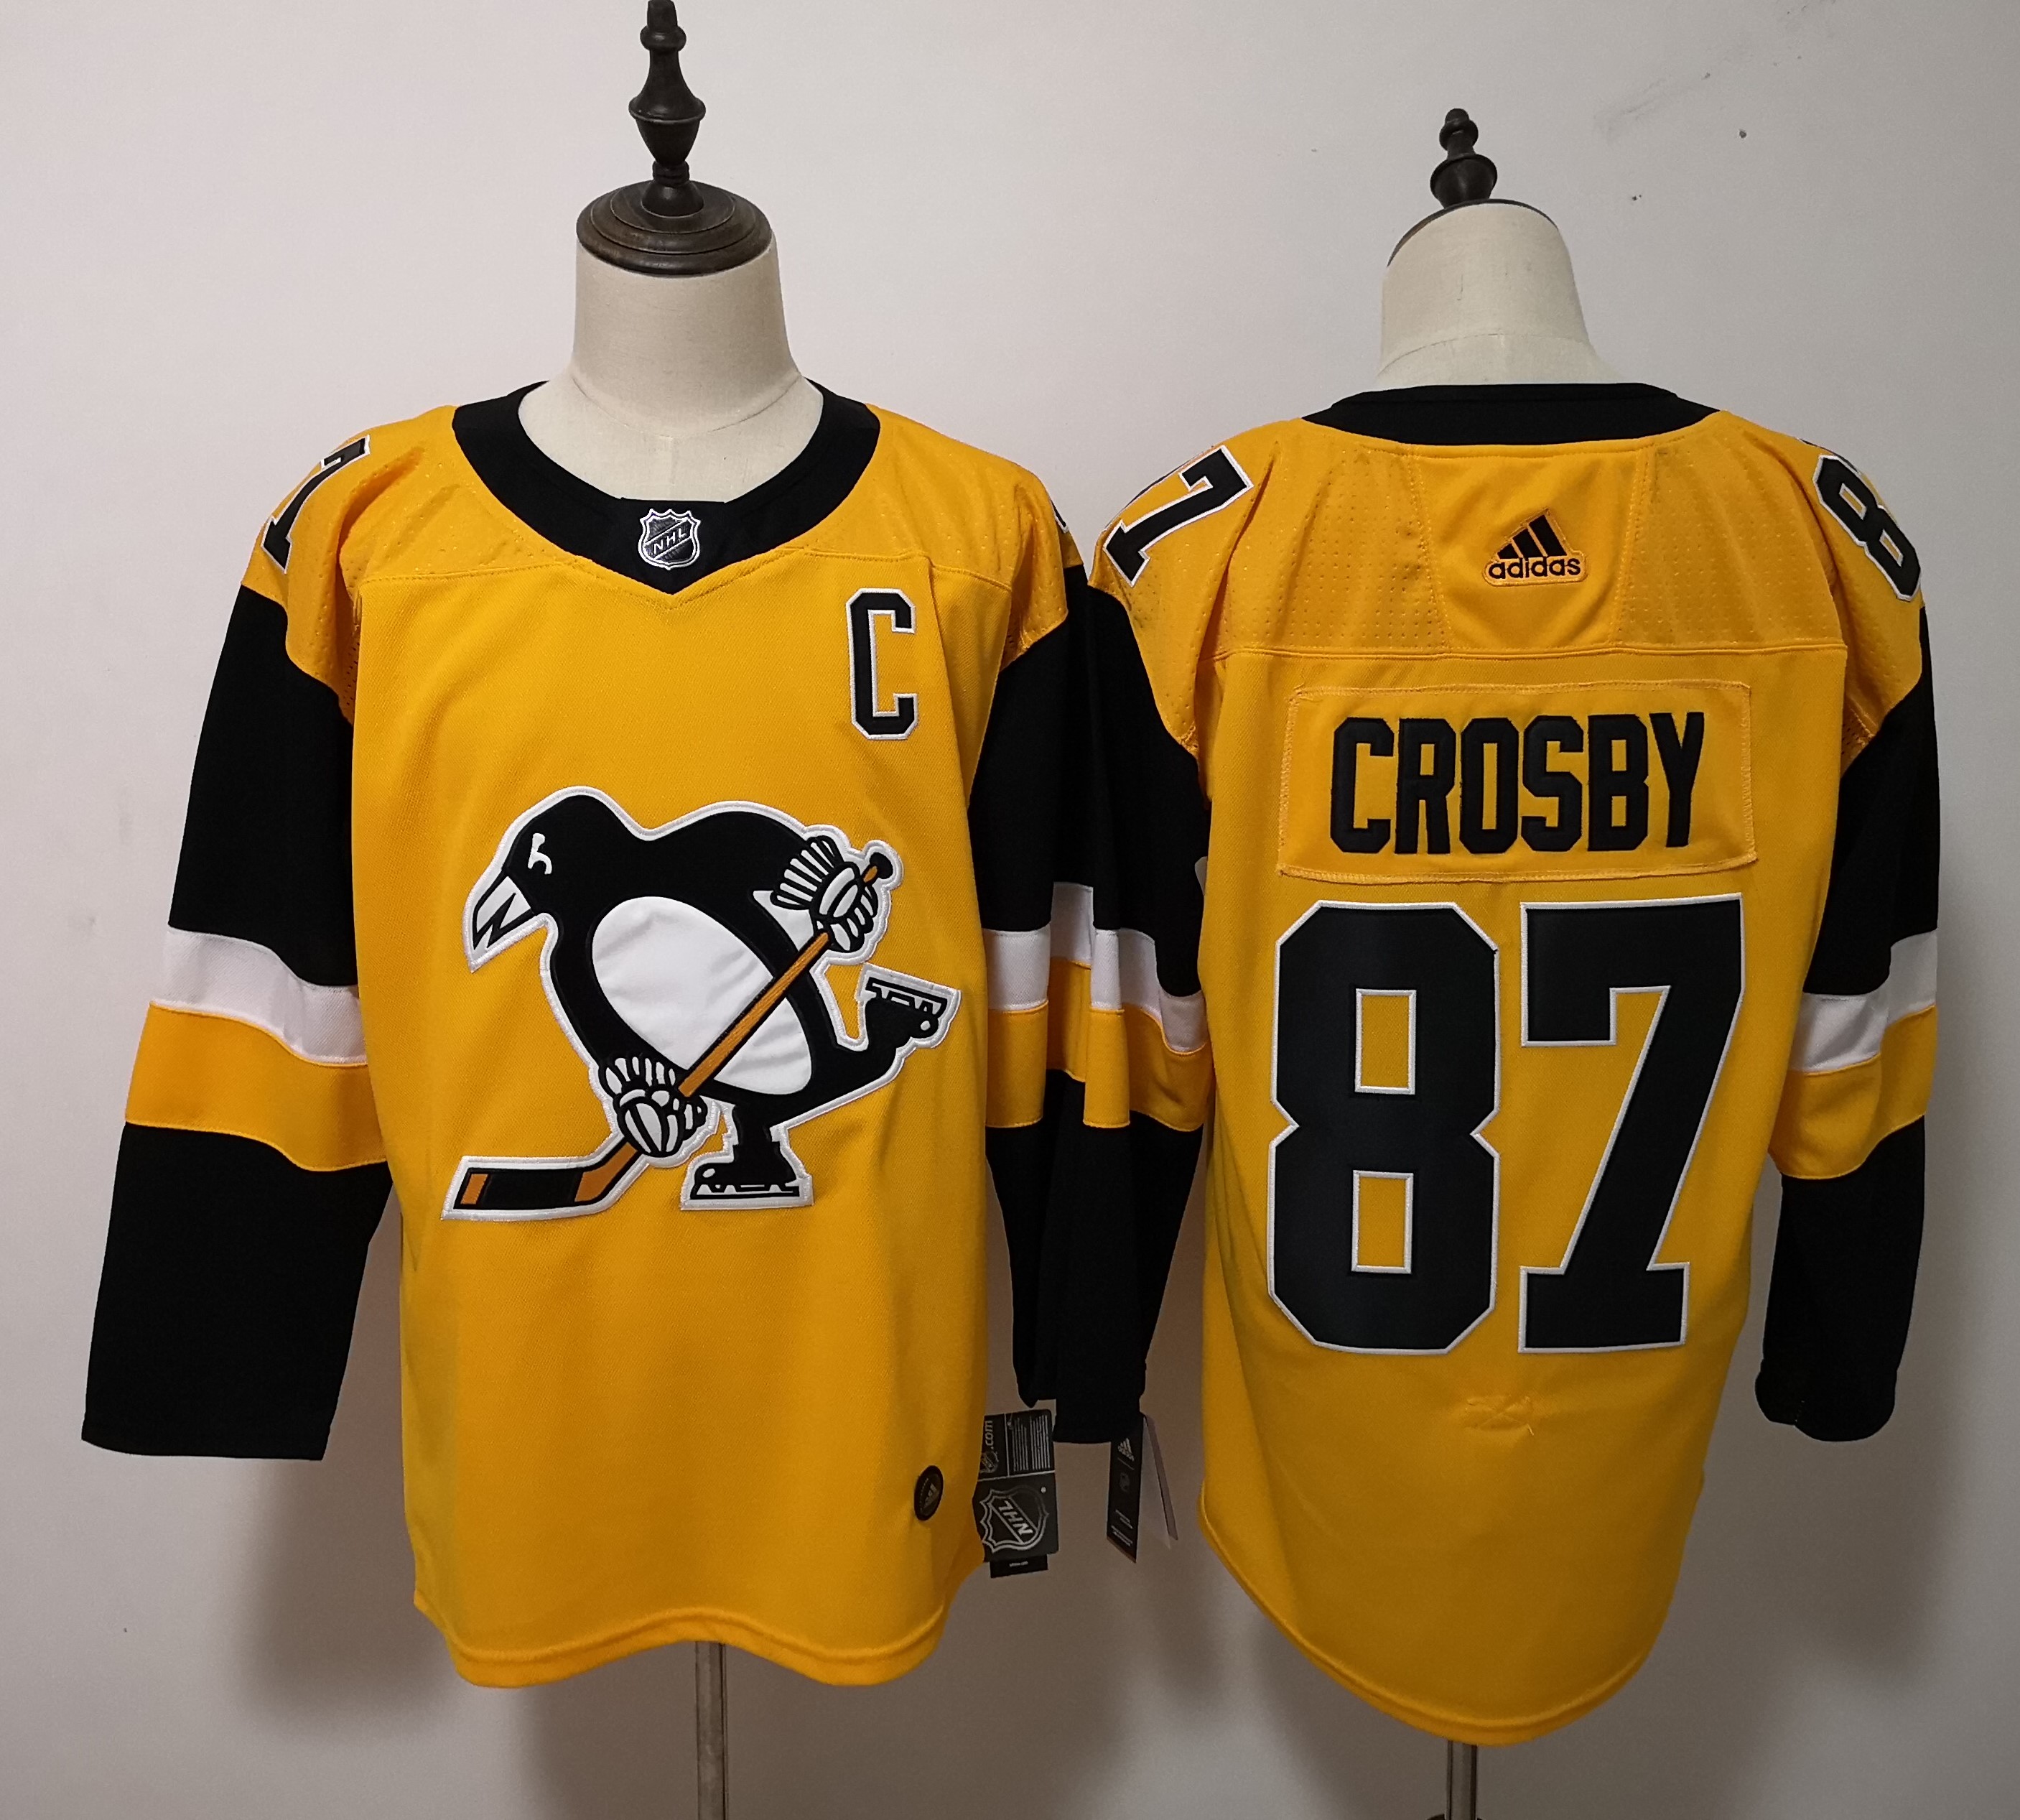 Adidas Men Pittsburgh Penguins #87 Sidney Crosby Yellow Alternate Stitched NHL Jersey->pittsburgh penguins->NHL Jersey